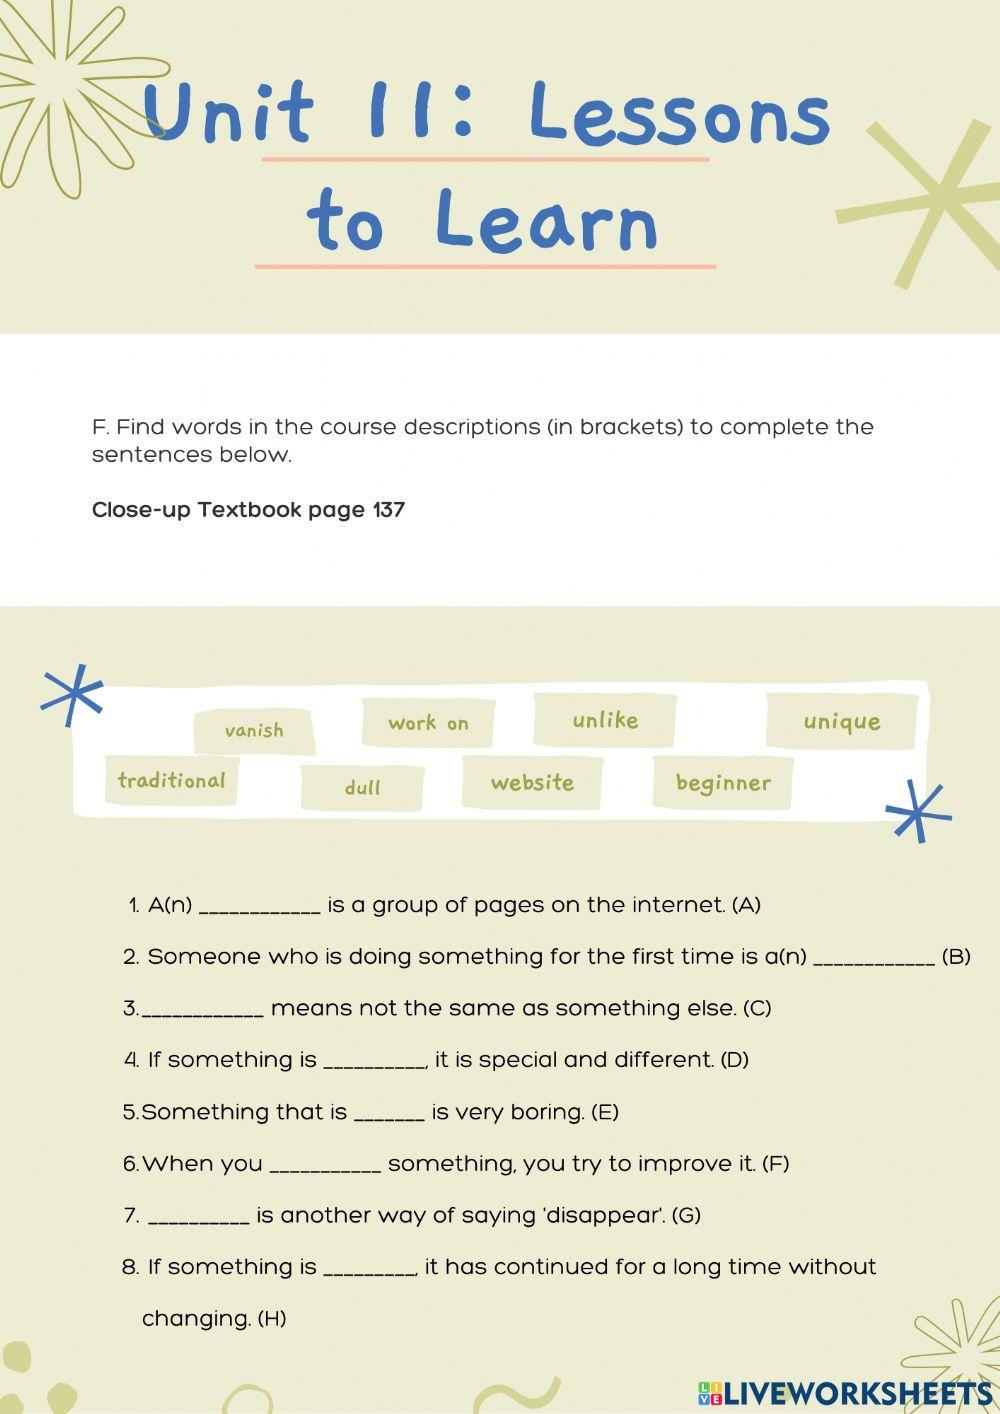 Unit 11: Lessons to Learn